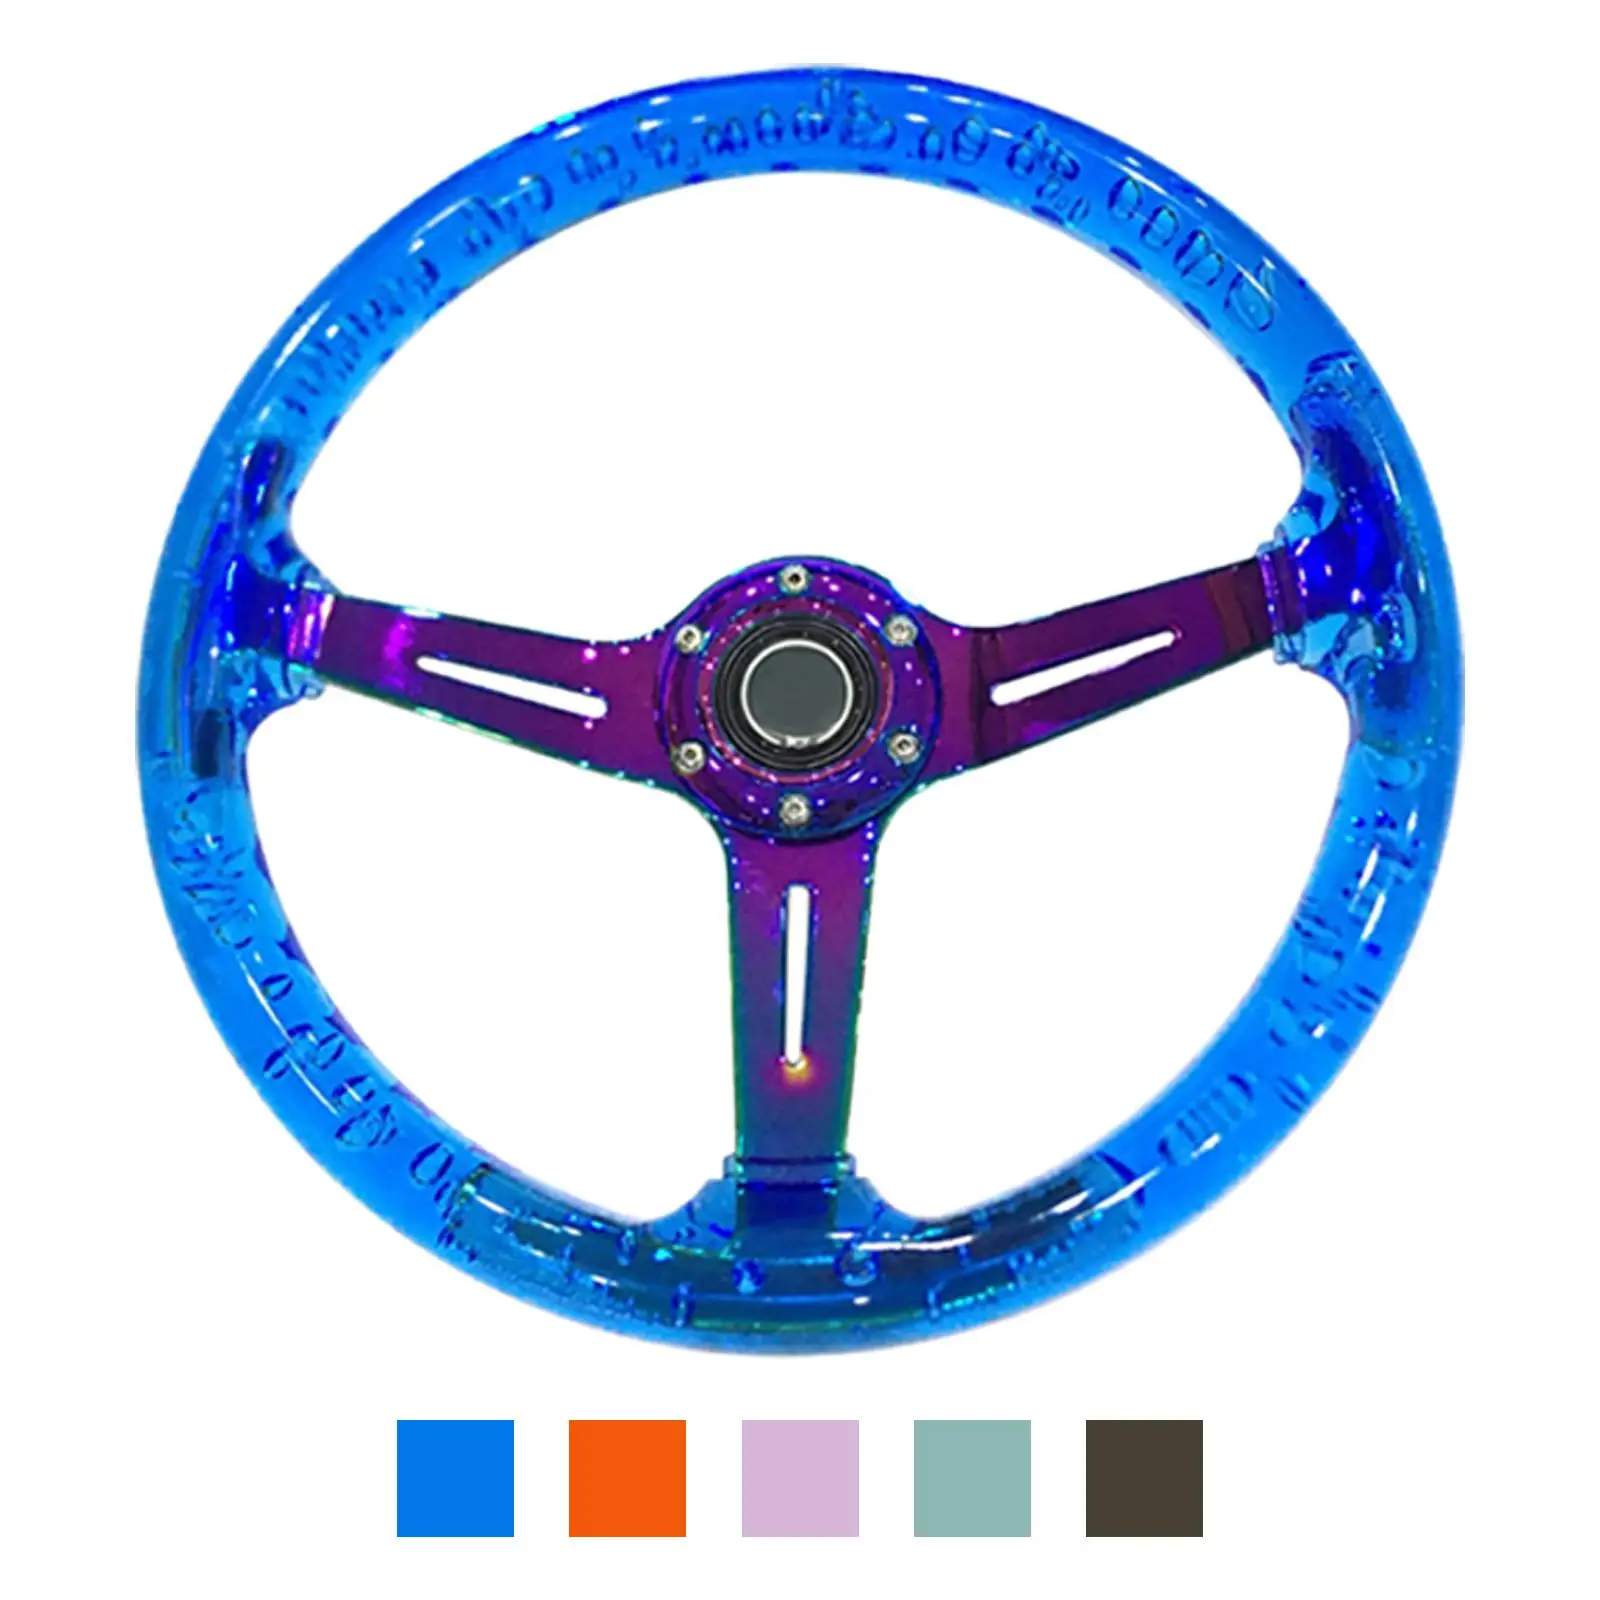 

Universal 14 inch 350mm Vehicle Steering Wheel Race Style for Race car Interior Modified Drifting Steering Wheel Accessories